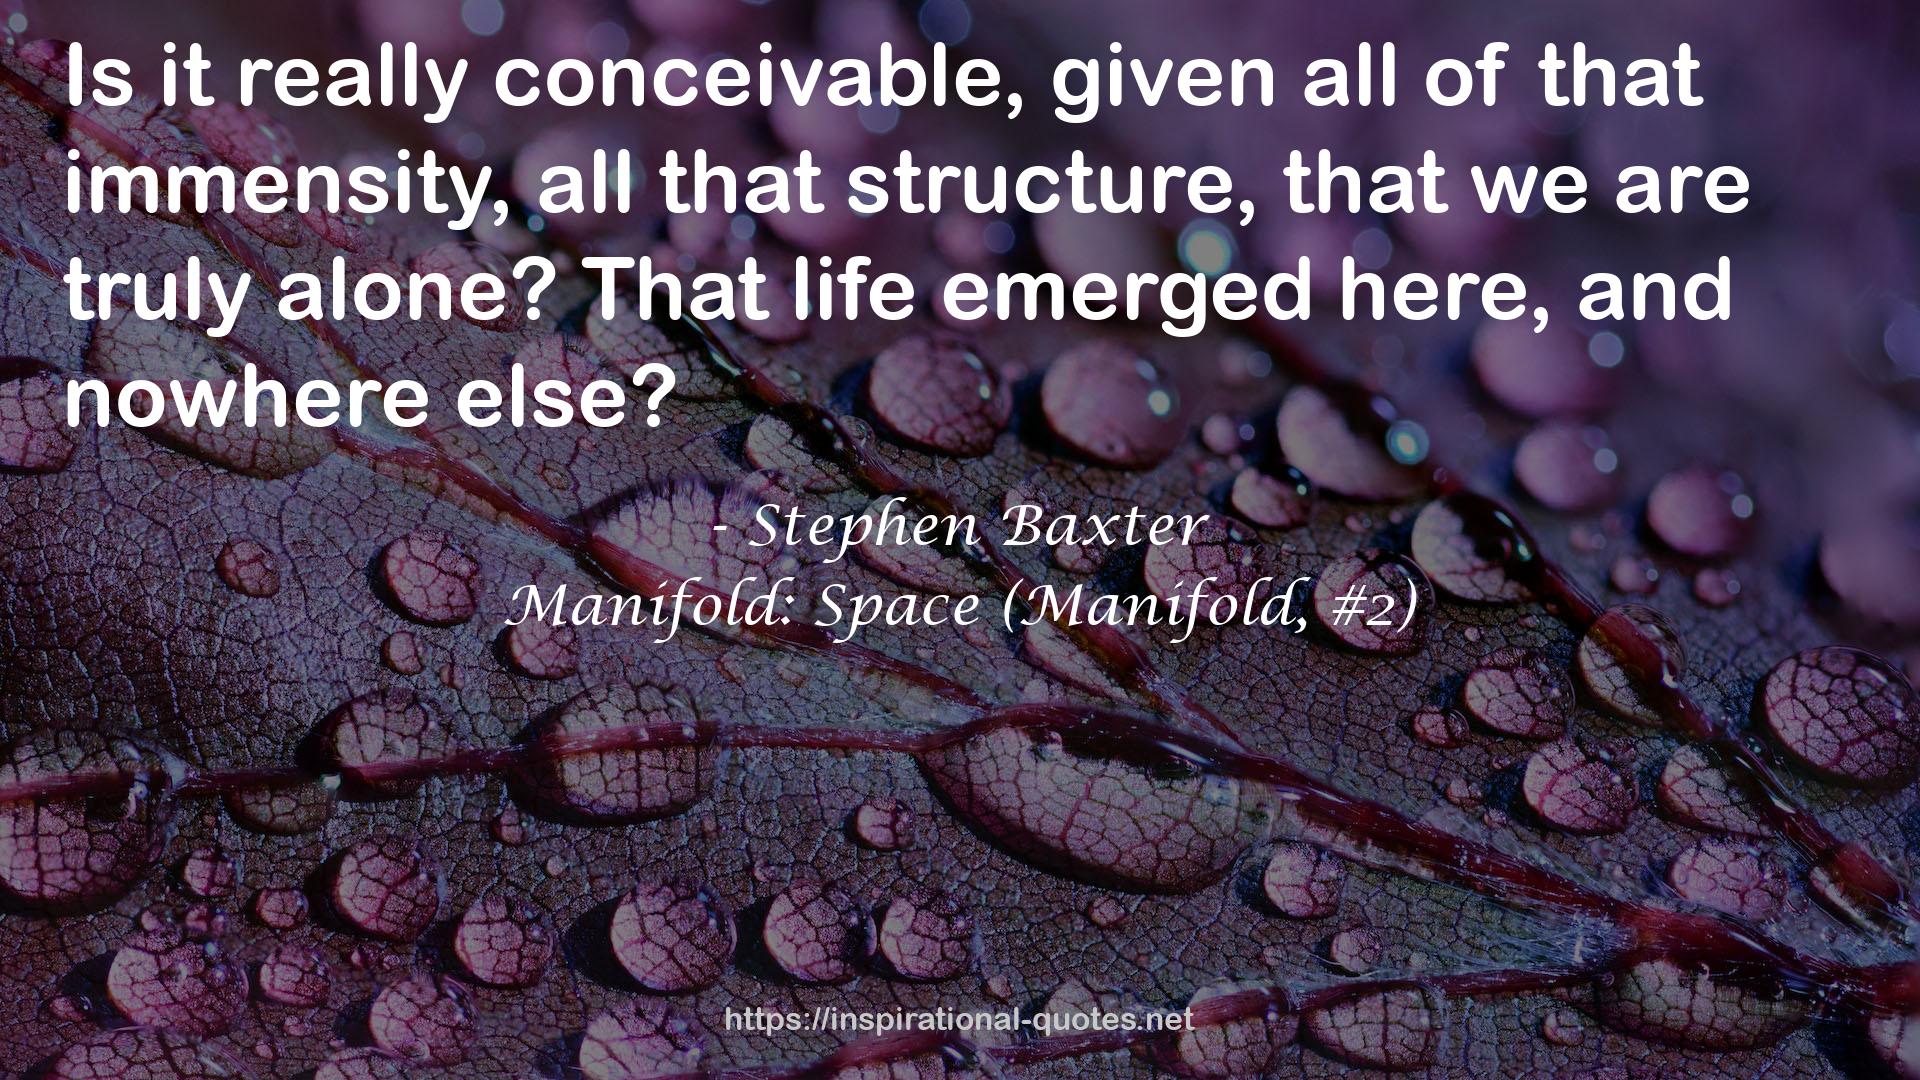 Manifold: Space (Manifold, #2) QUOTES